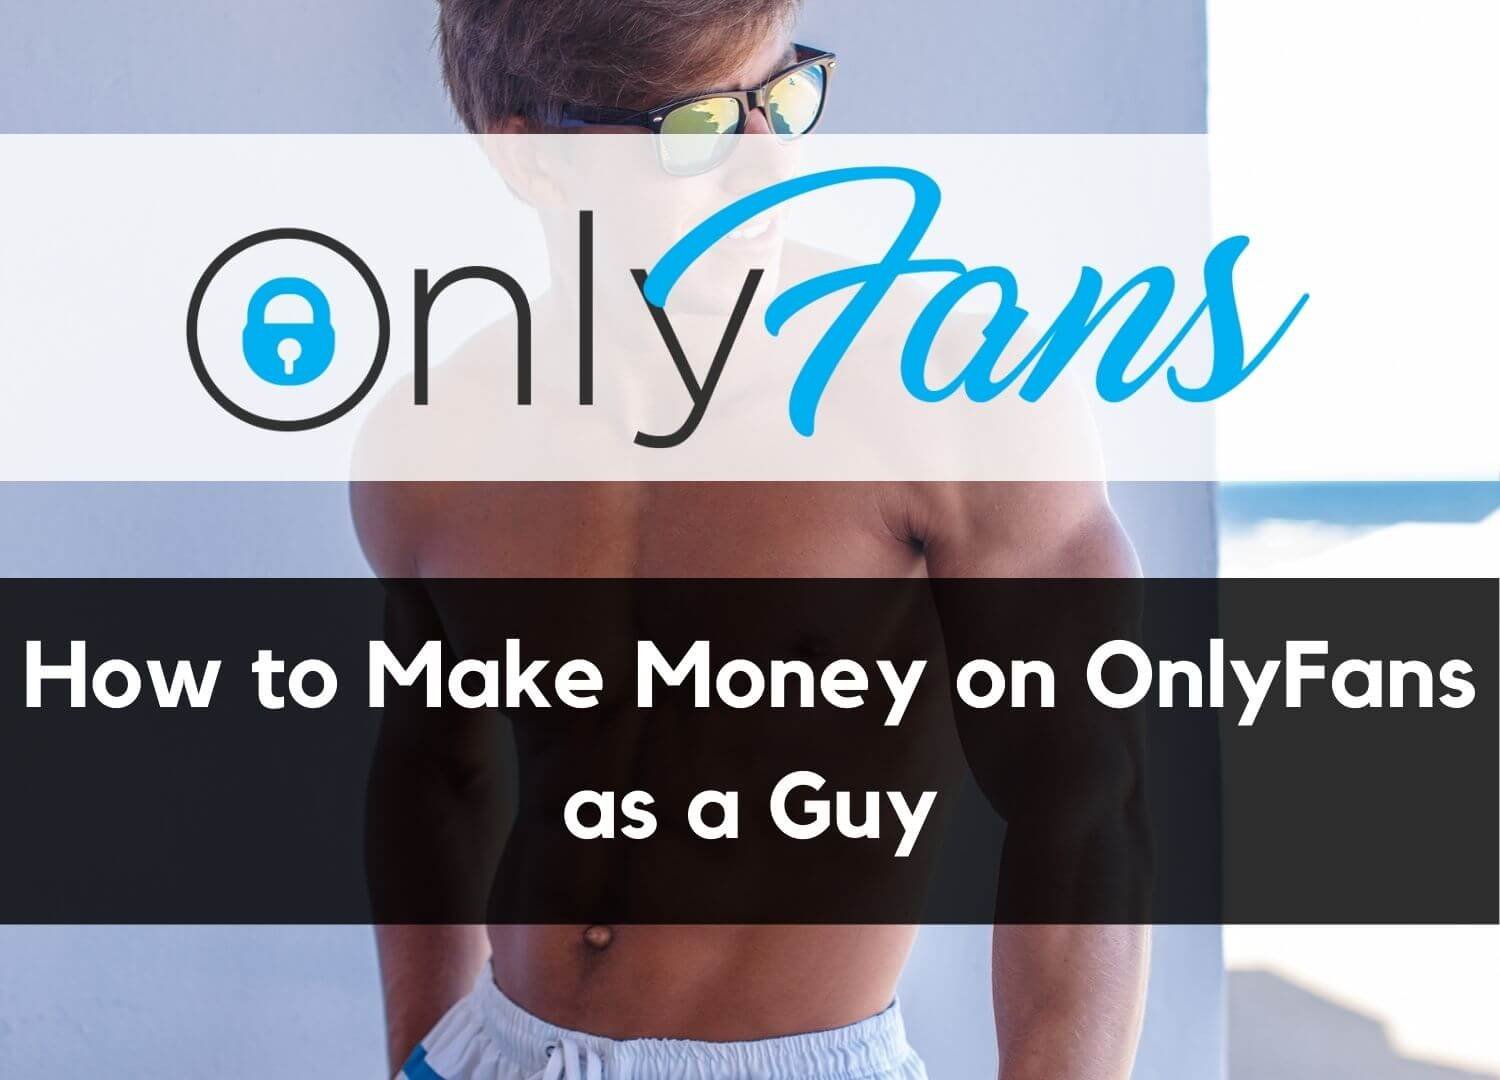 How can a guy make money on onlyfans